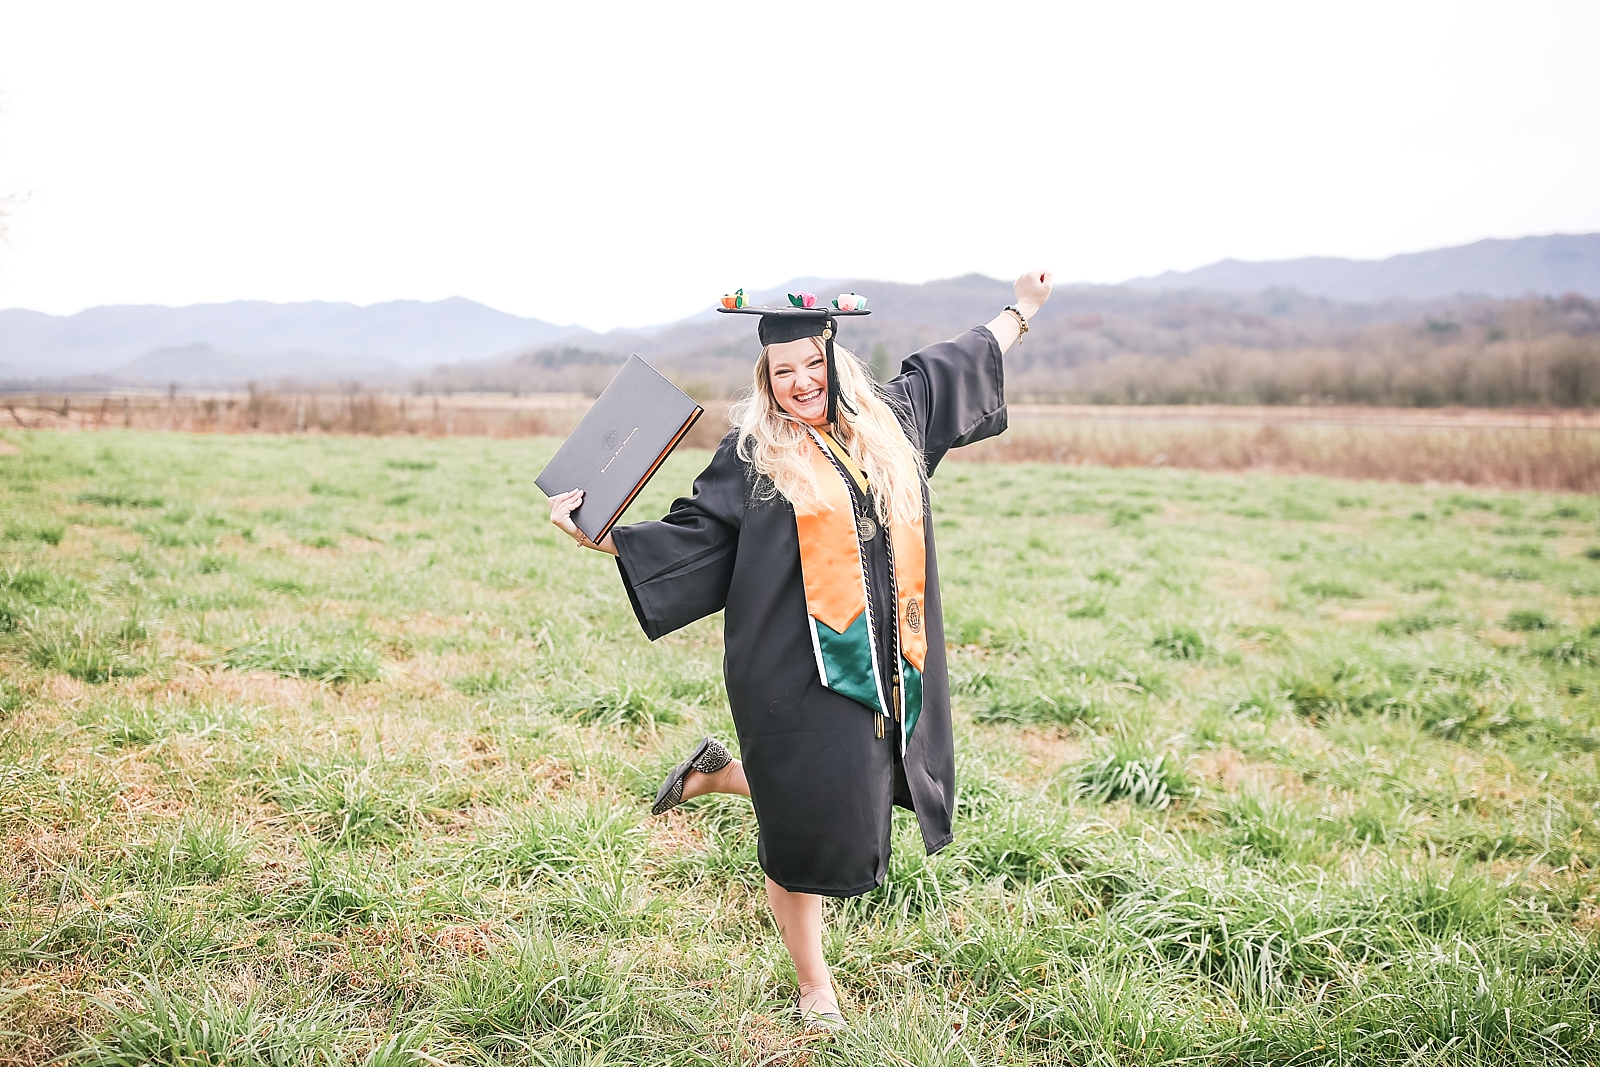 Kennesaw State University Senior Session Rachel cheering holding diploma in cap and gown photo